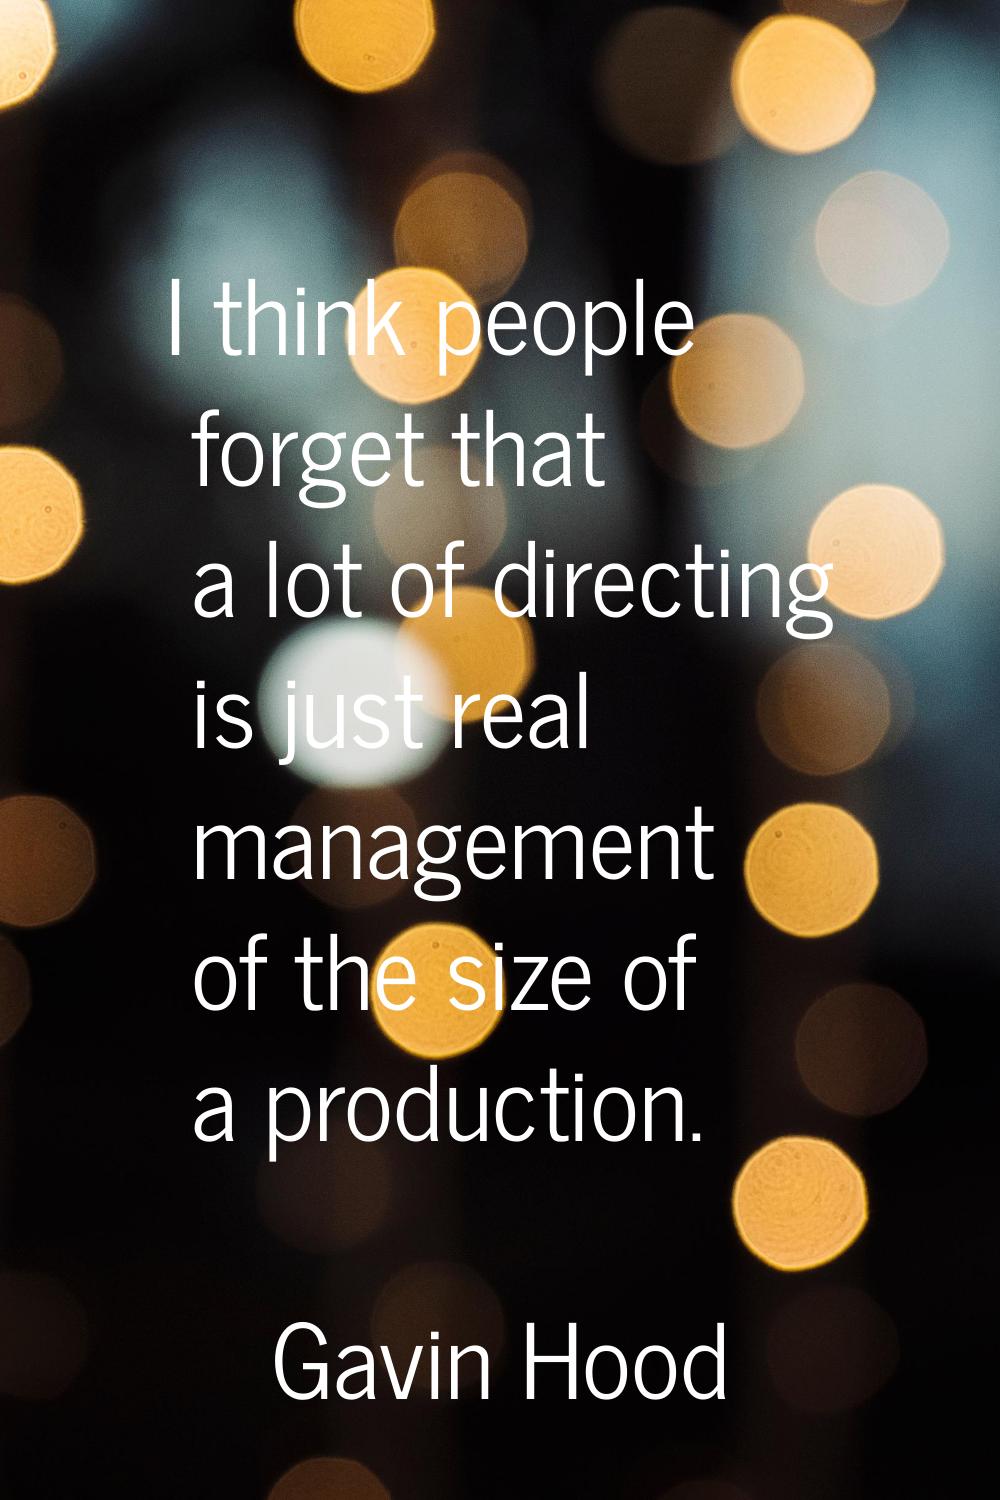 I think people forget that a lot of directing is just real management of the size of a production.